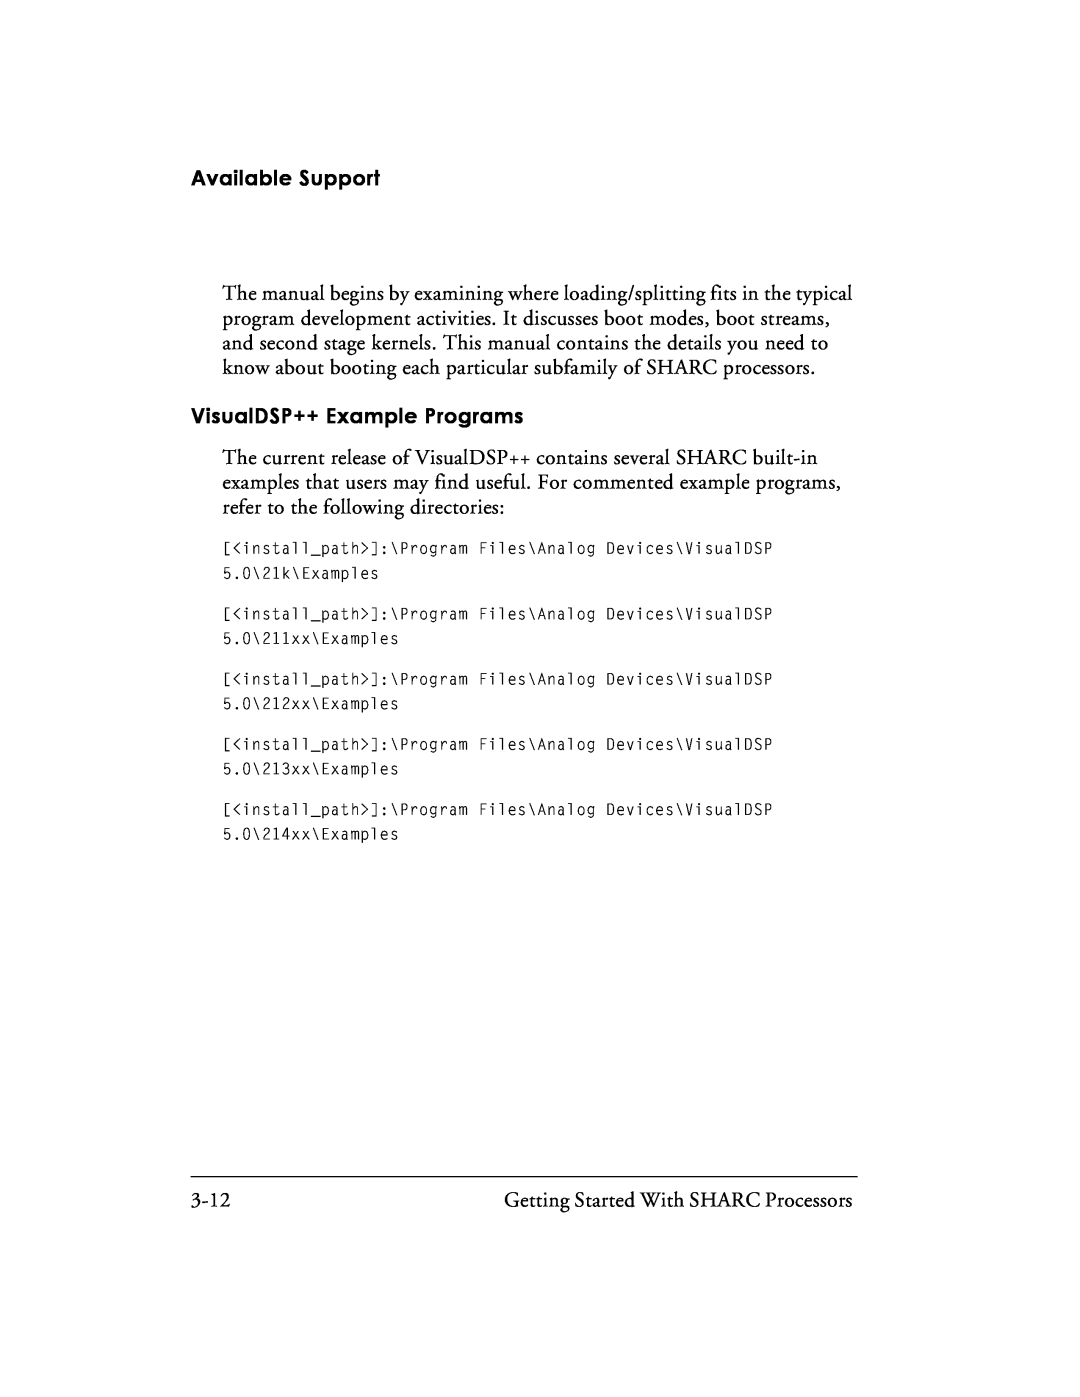 Analog Devices 82-003536-01 manual VisualDSP++ Example Programs, Available Support 